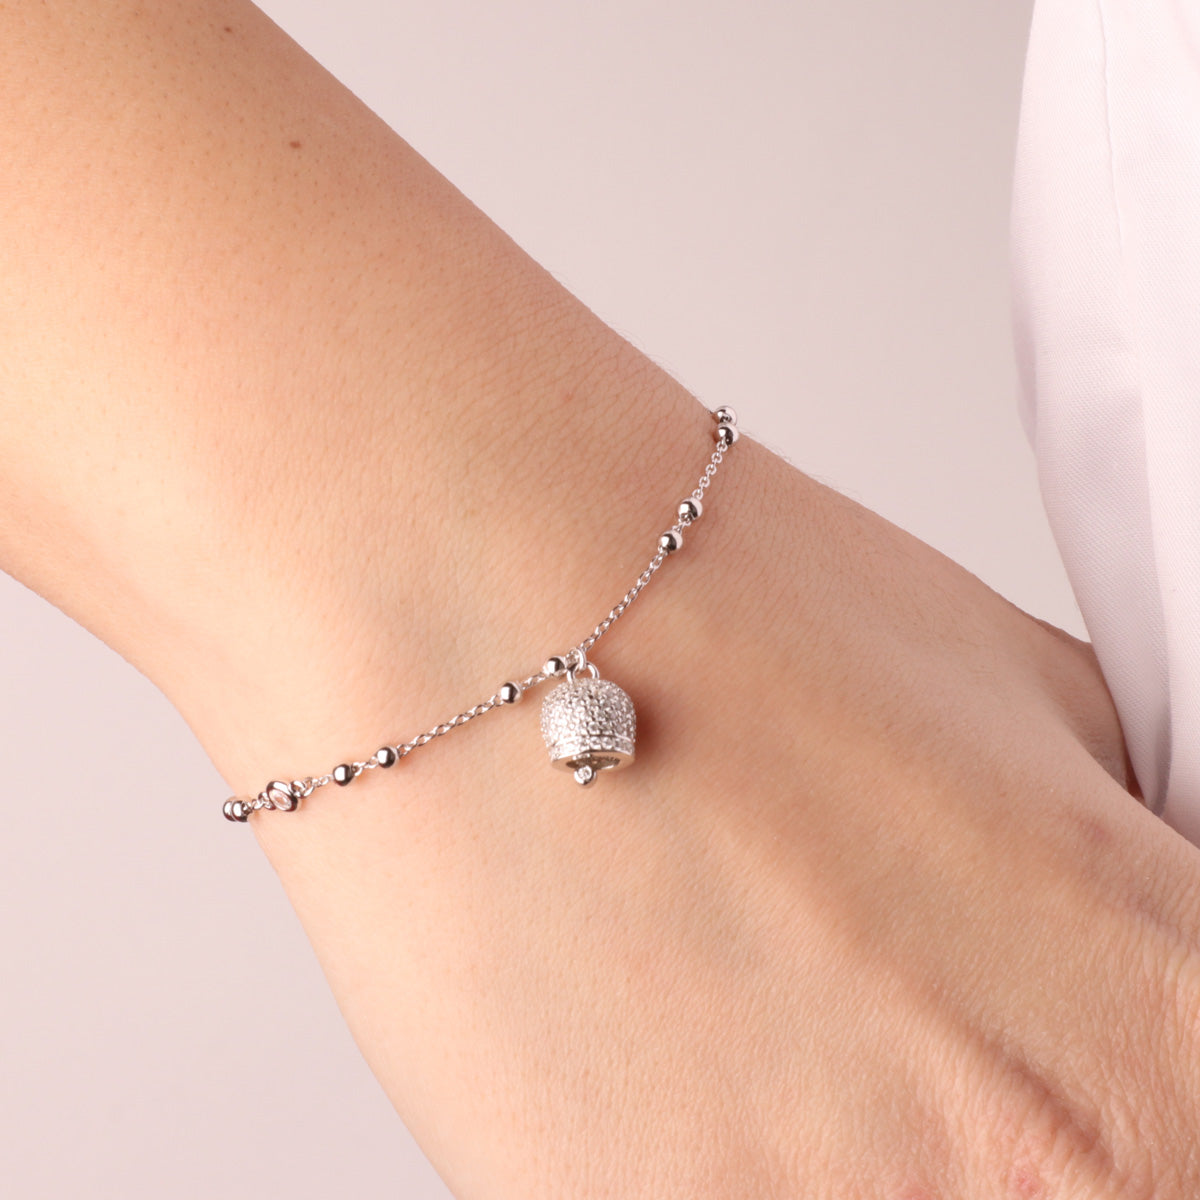 925 silver bracelet in white crystals and charming bell pendant stormed by white zirconi